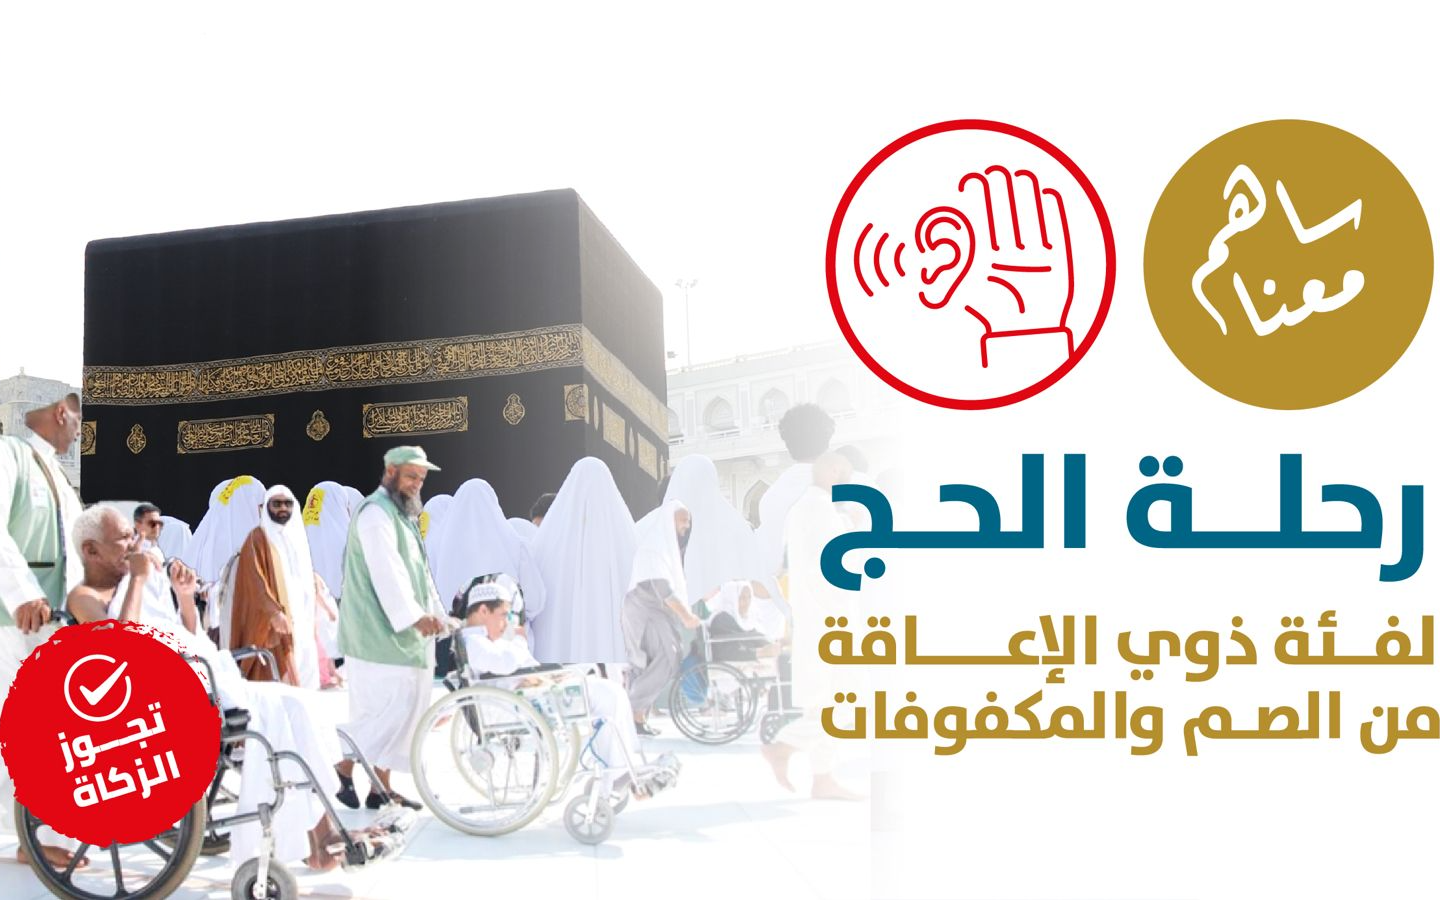 Hajj trip for people with disabilities, deaf and blind people - photo